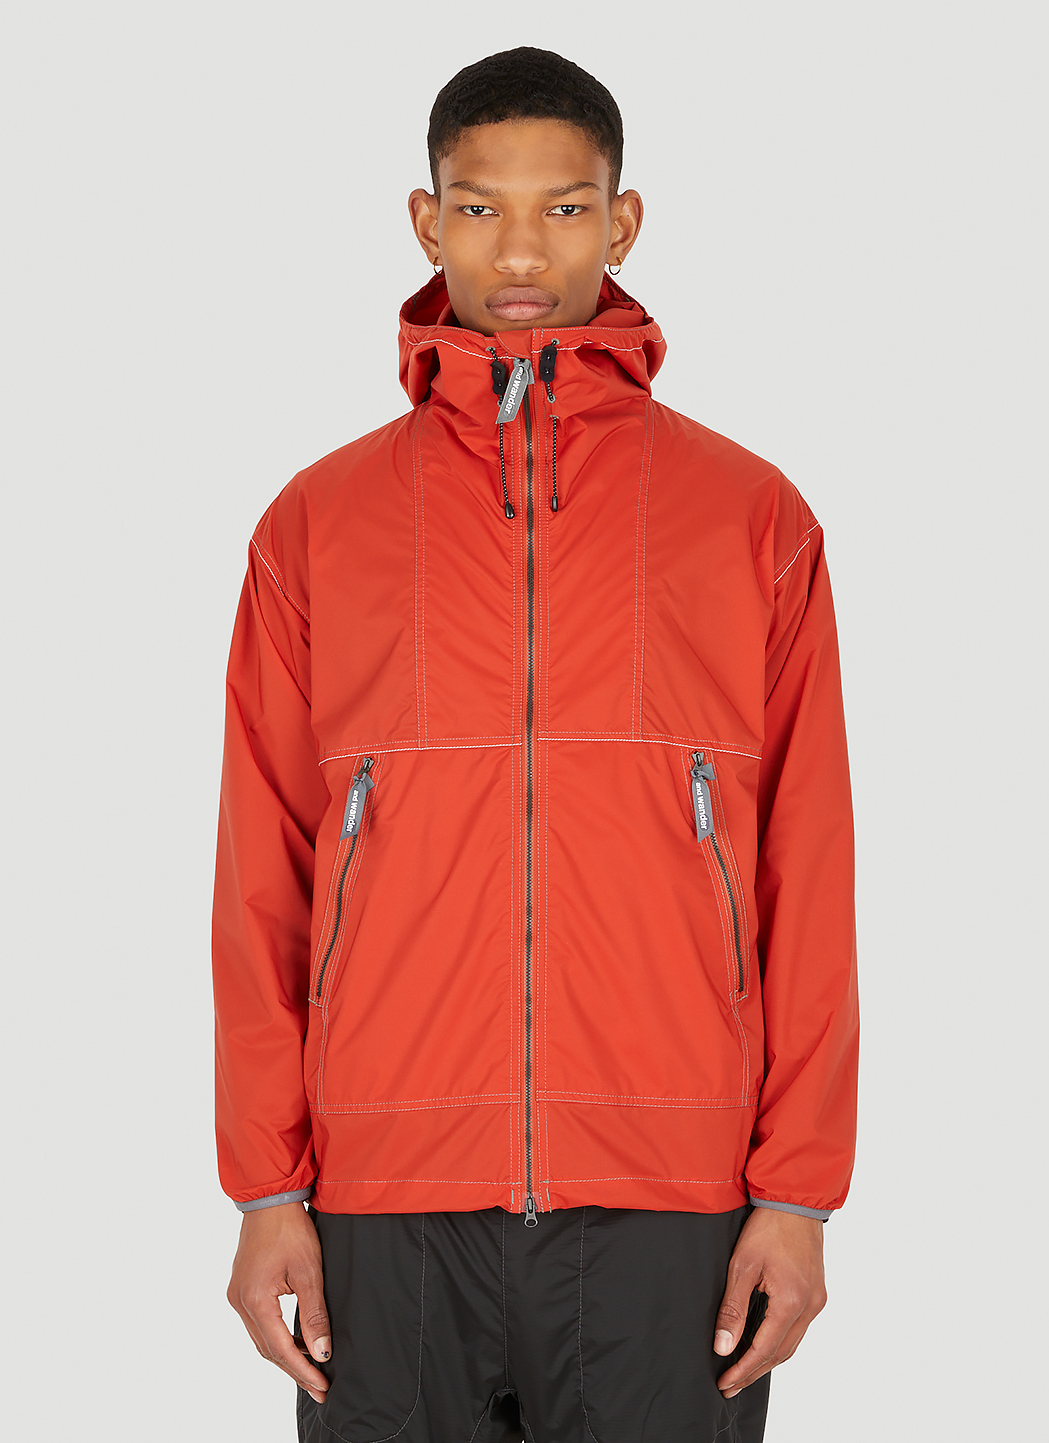 And Wander Men's Pertex Wind Jacket in Red